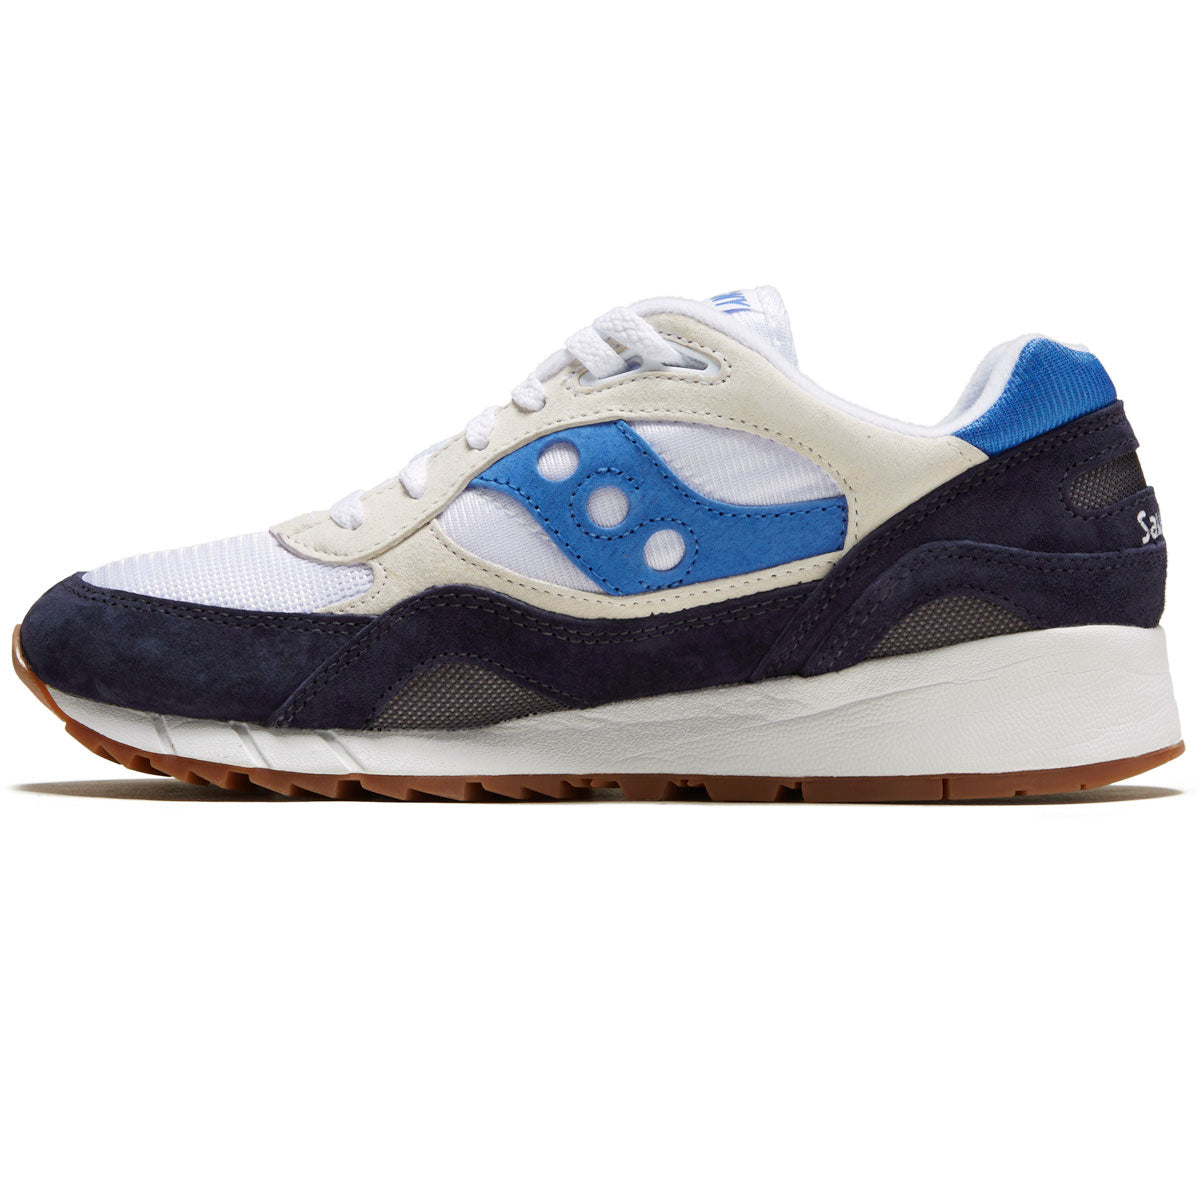 Saucony Shadow 6000 Shoes - White/Navy/Blue image 2